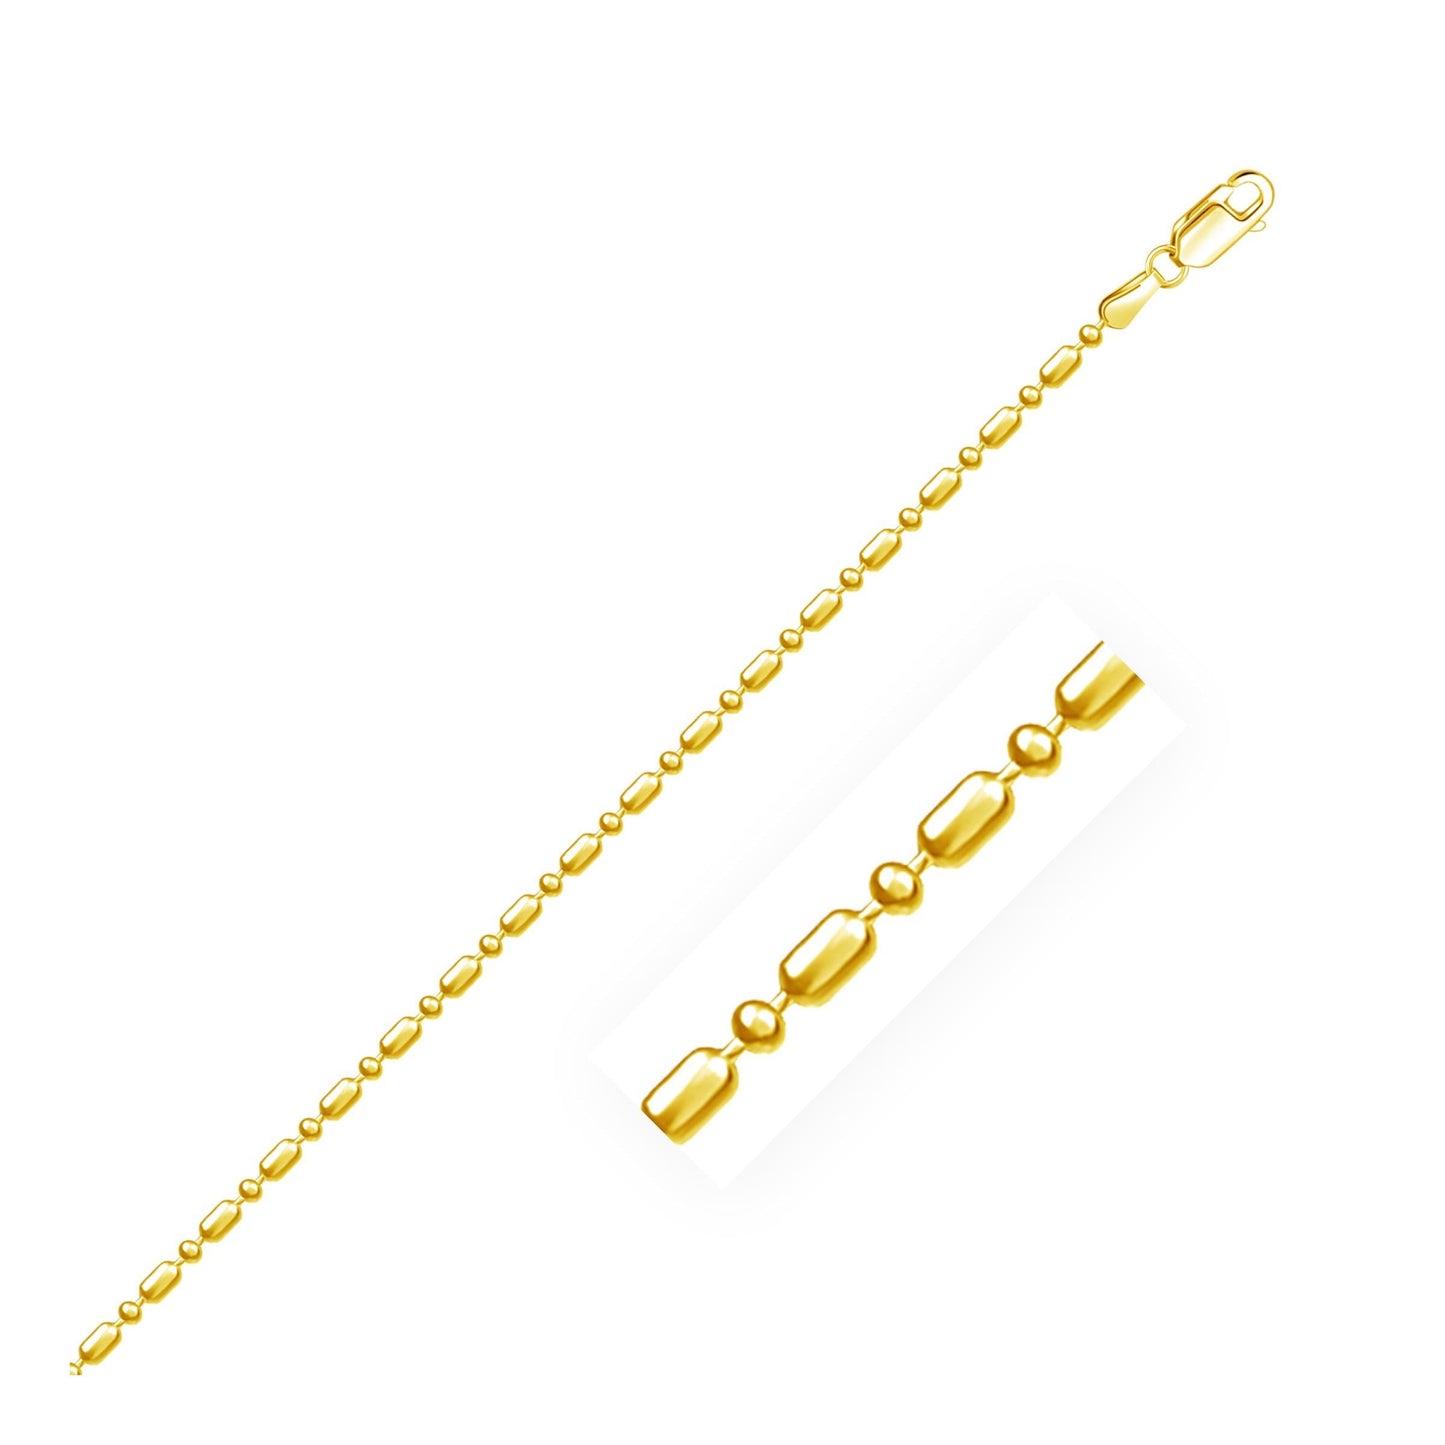 14k Yellow Gold Alternating Bead Chain in 1.5 mm